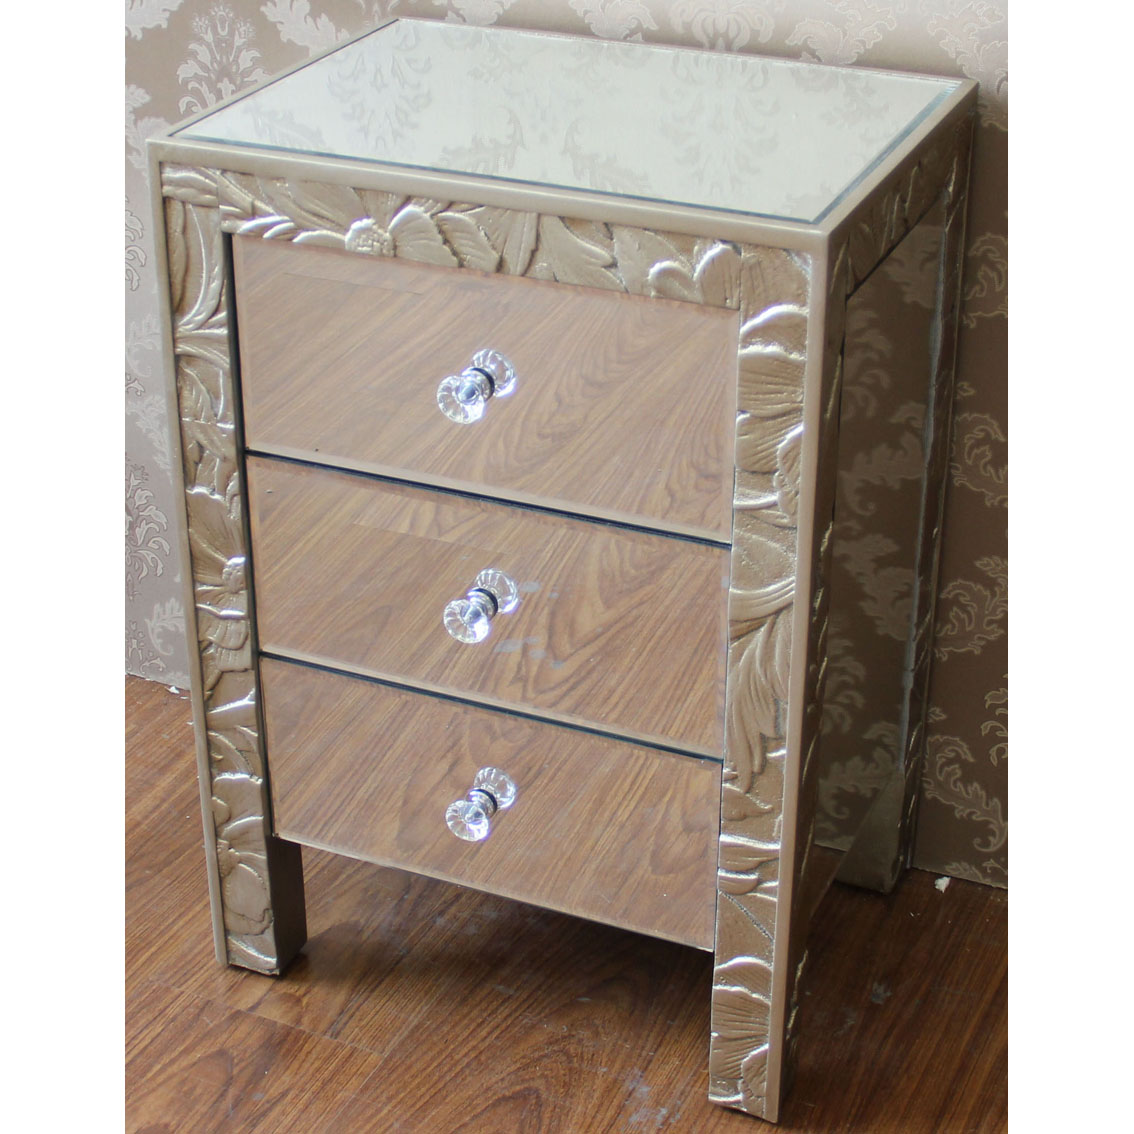 Wood carving chest with 3 mirror drawers